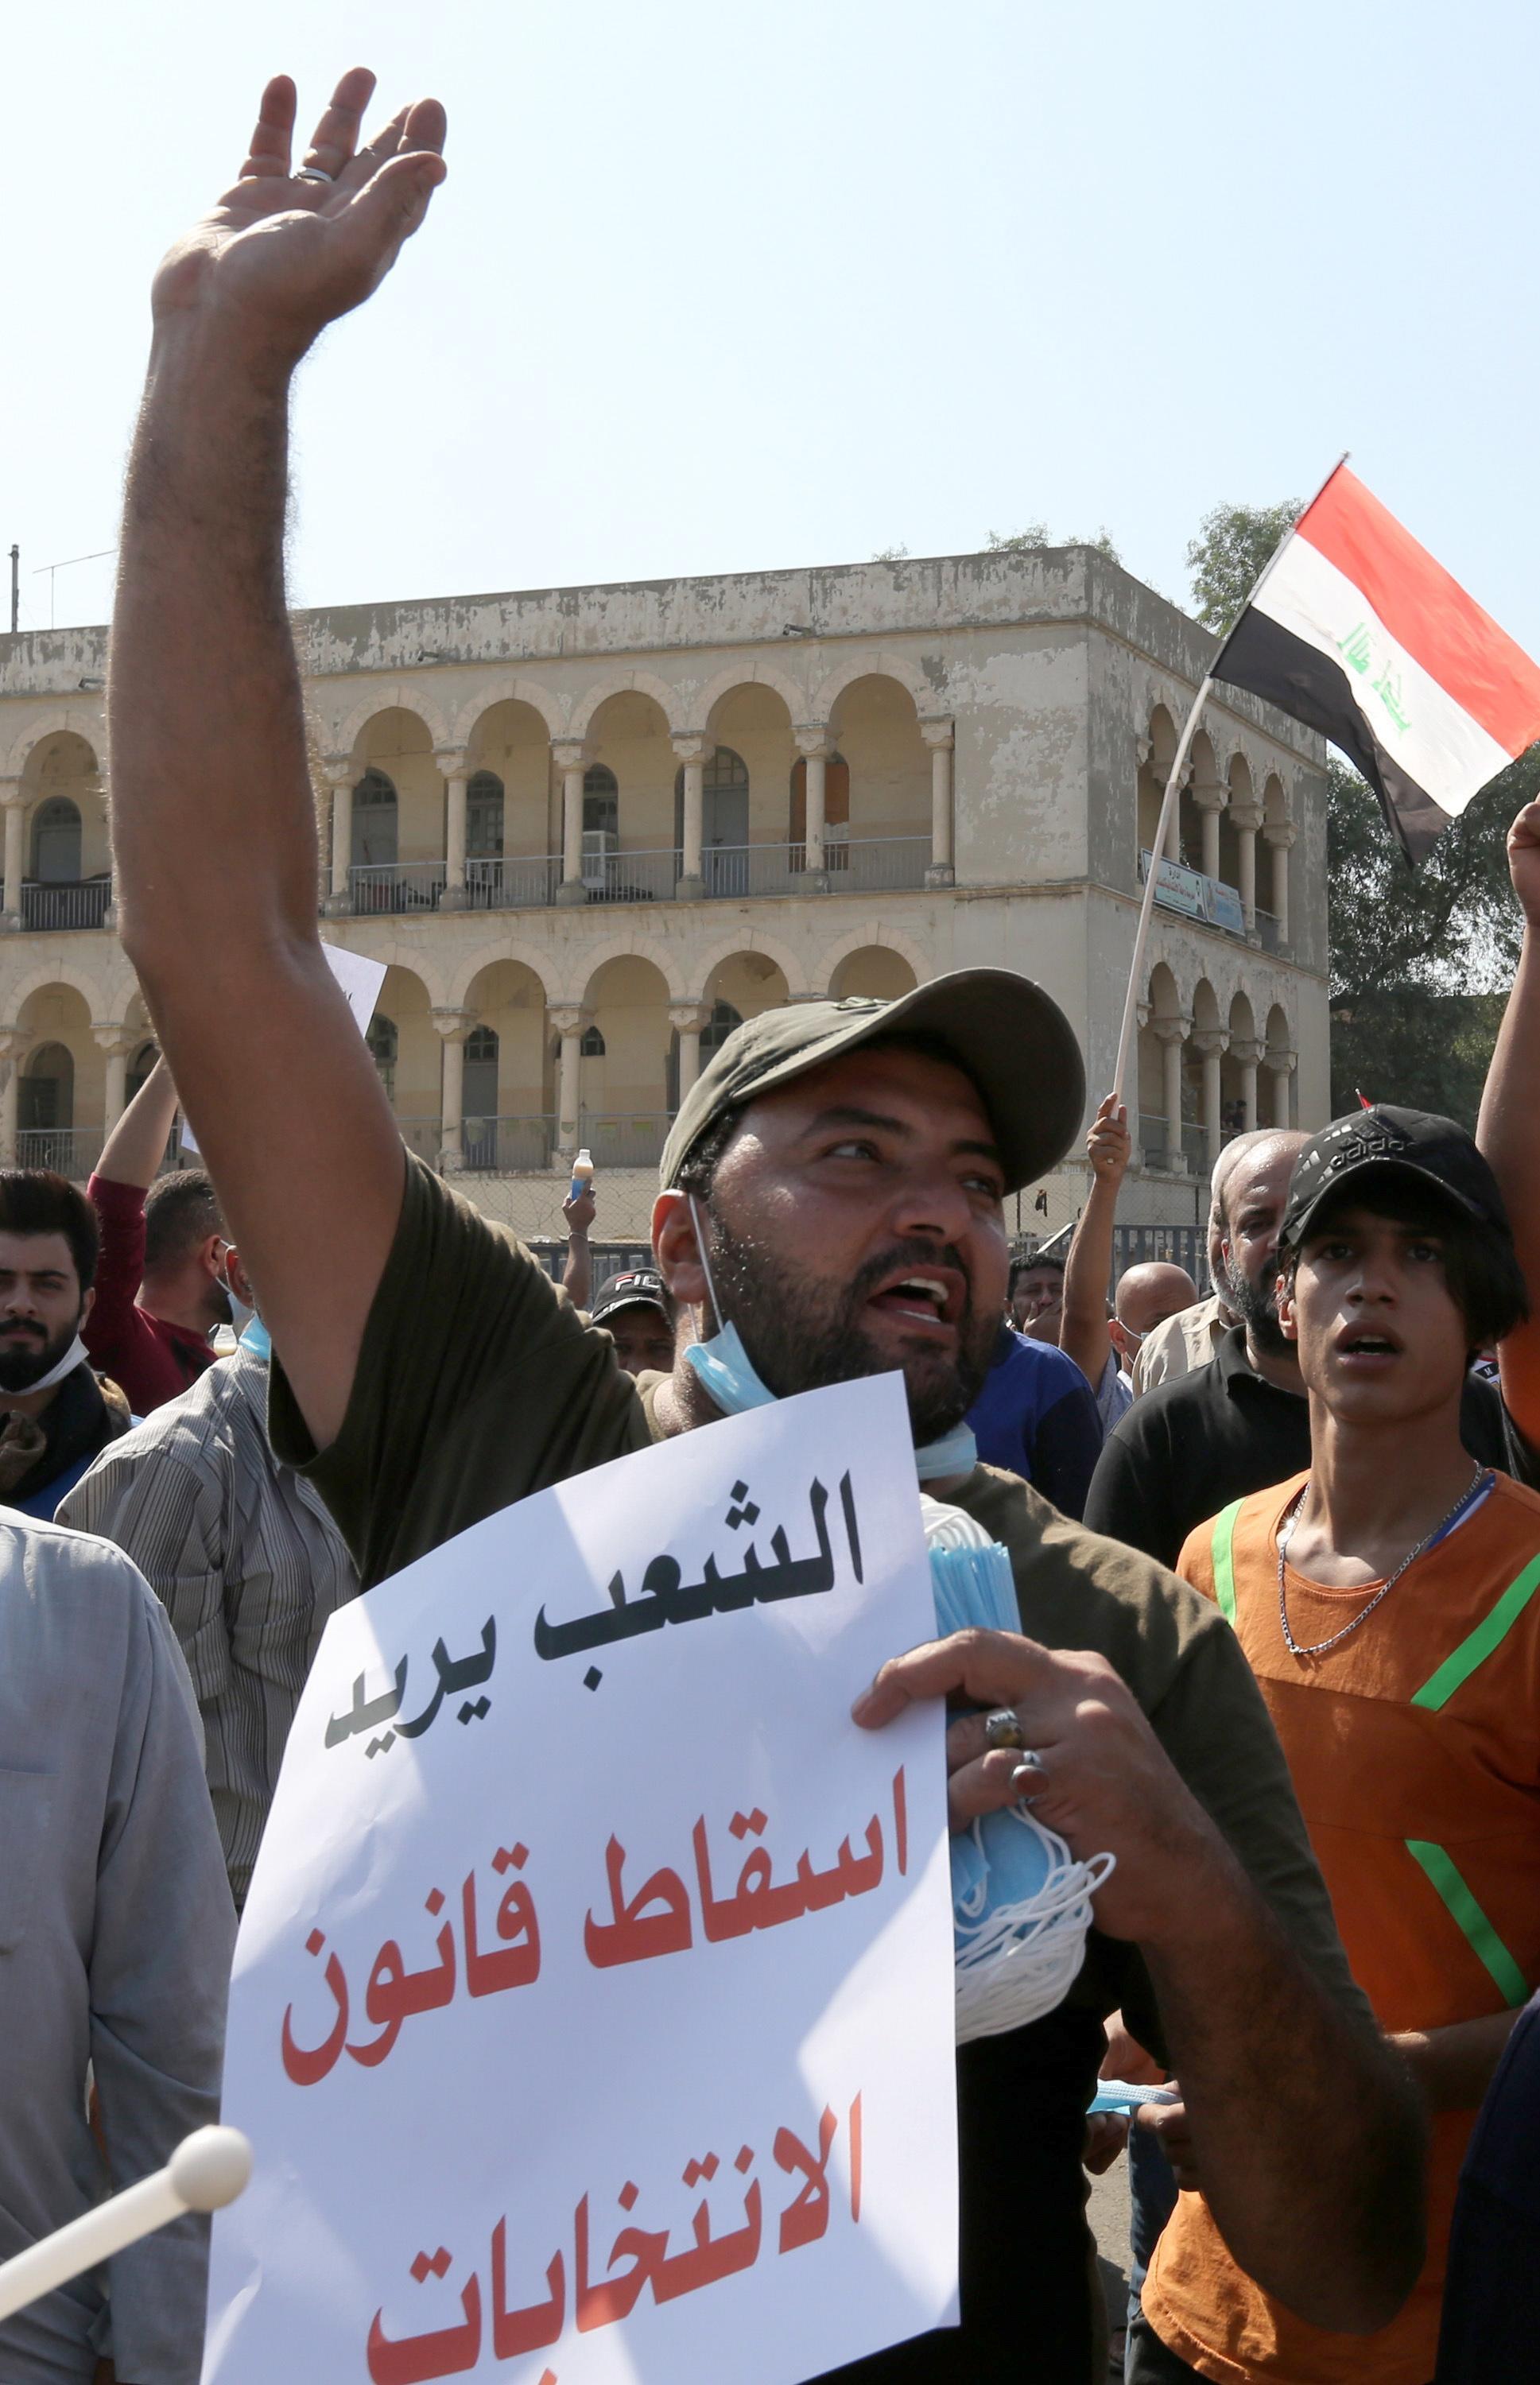 epa07950893 Iraqi protesters chant slogans and carry placards reading in Arabic 'The people want to bring down the election law' during protests at Tahrir square in central Baghdad, Iraq, 26 October 2019. According to media reports, at least 40 people died during violence between security forces and people protesting against the government in Baghdad and southern Iraqi cities.  EPA/AHMED JALIL